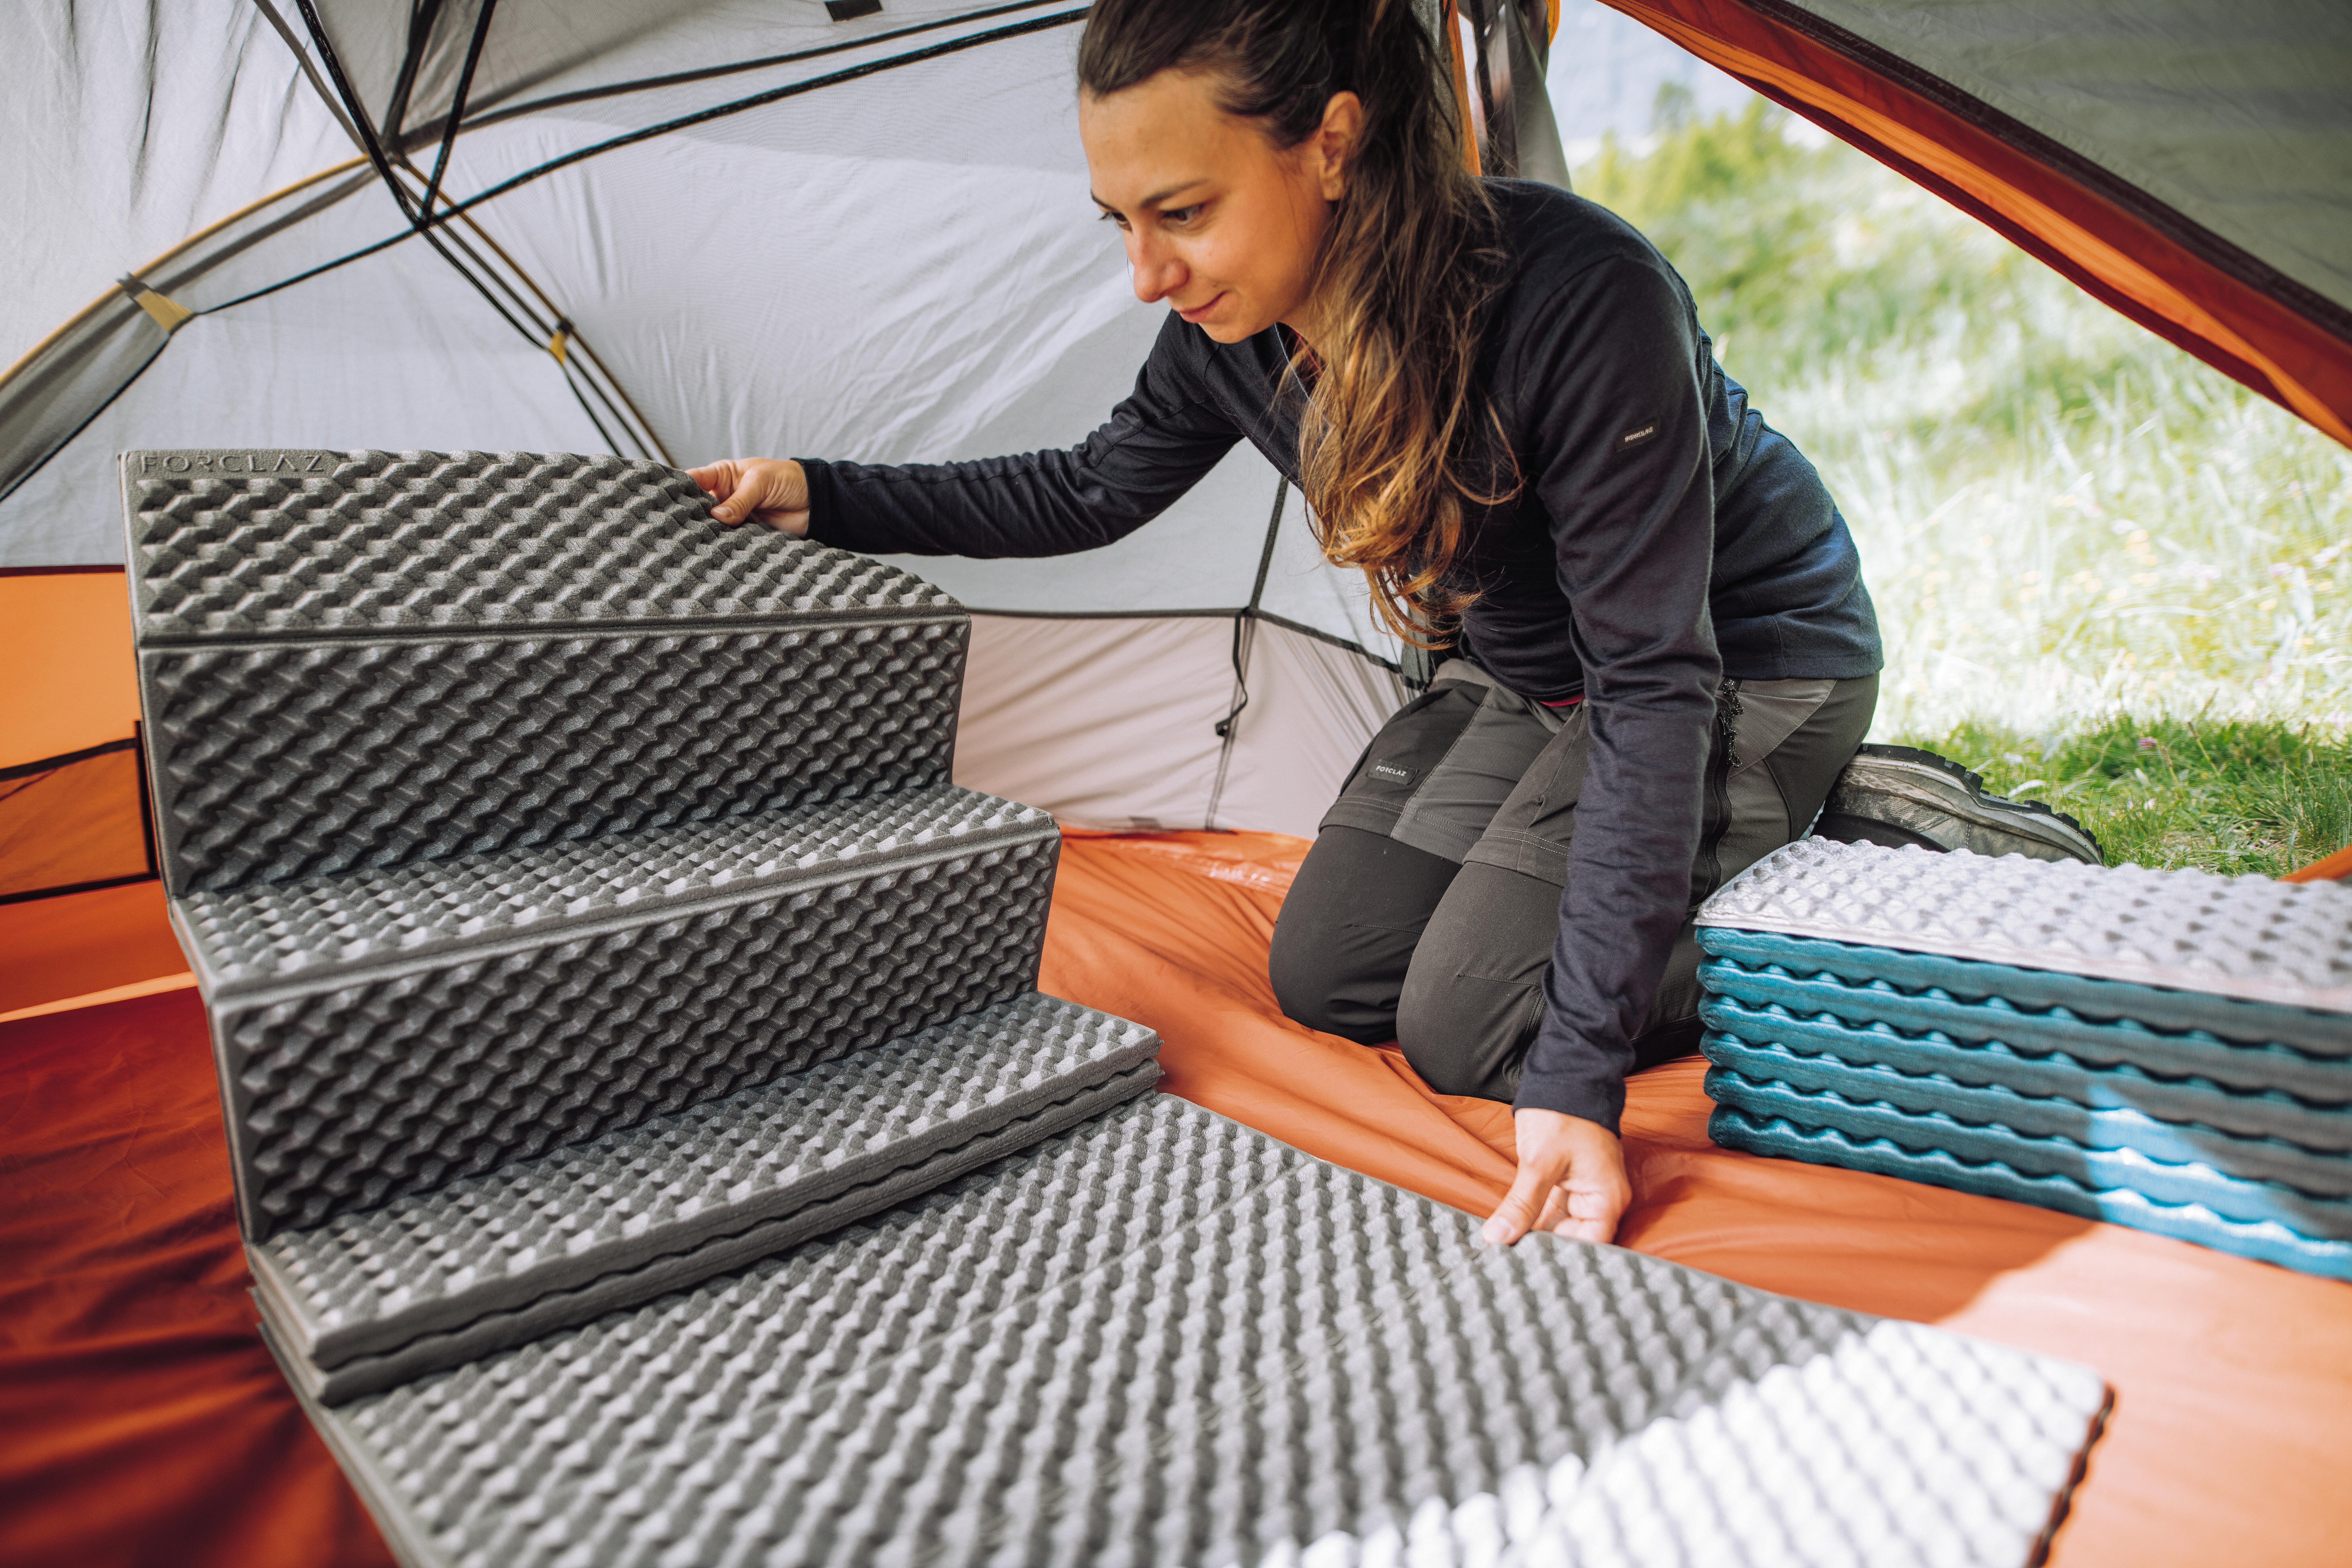 How to optimise the insulation of your mattress